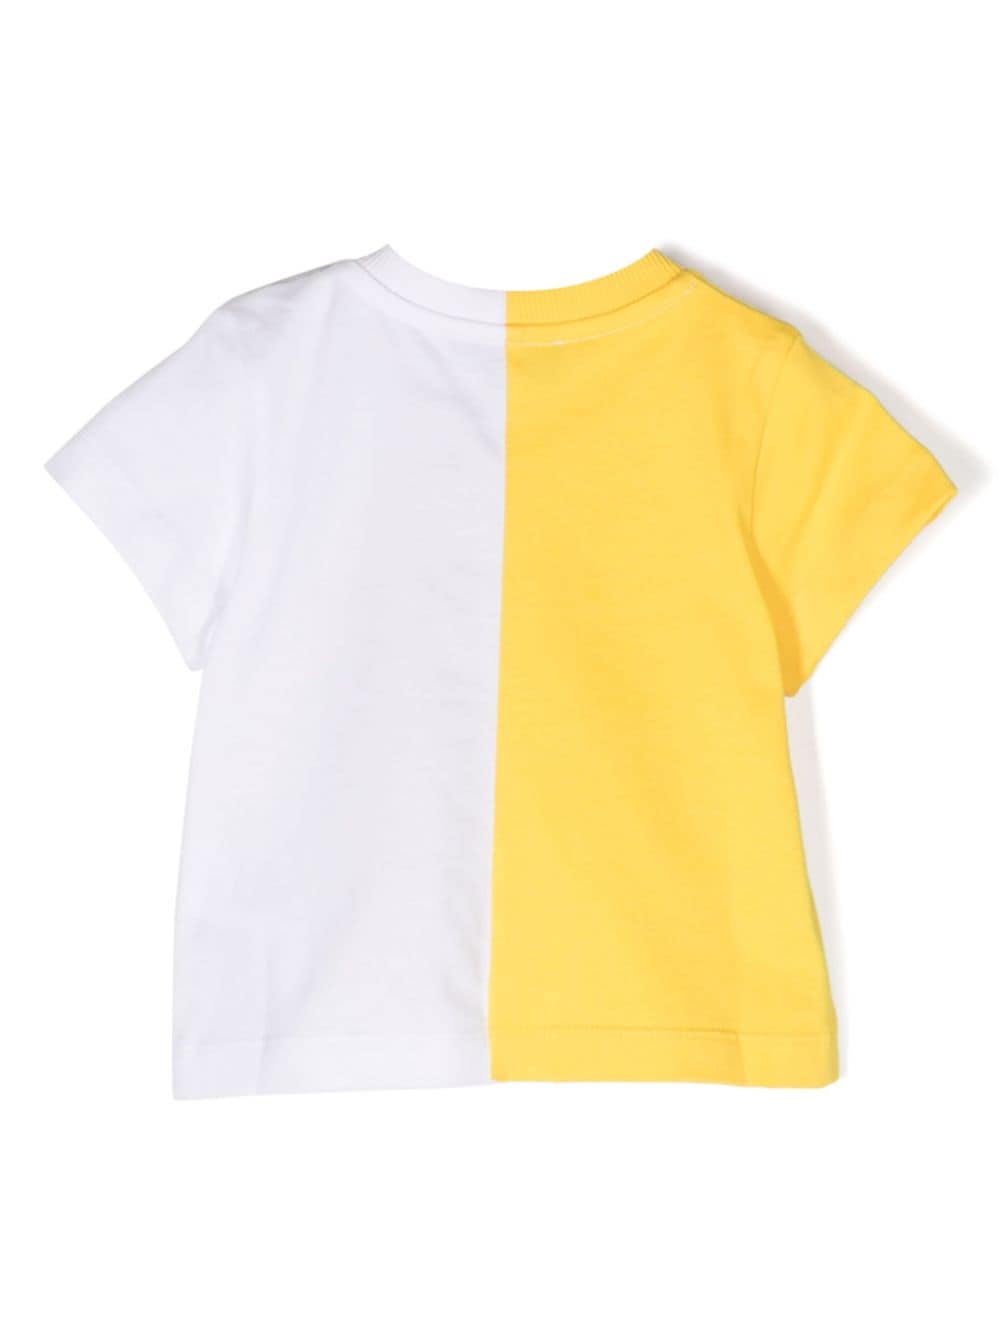 White and yellow baby t-shirt with logo